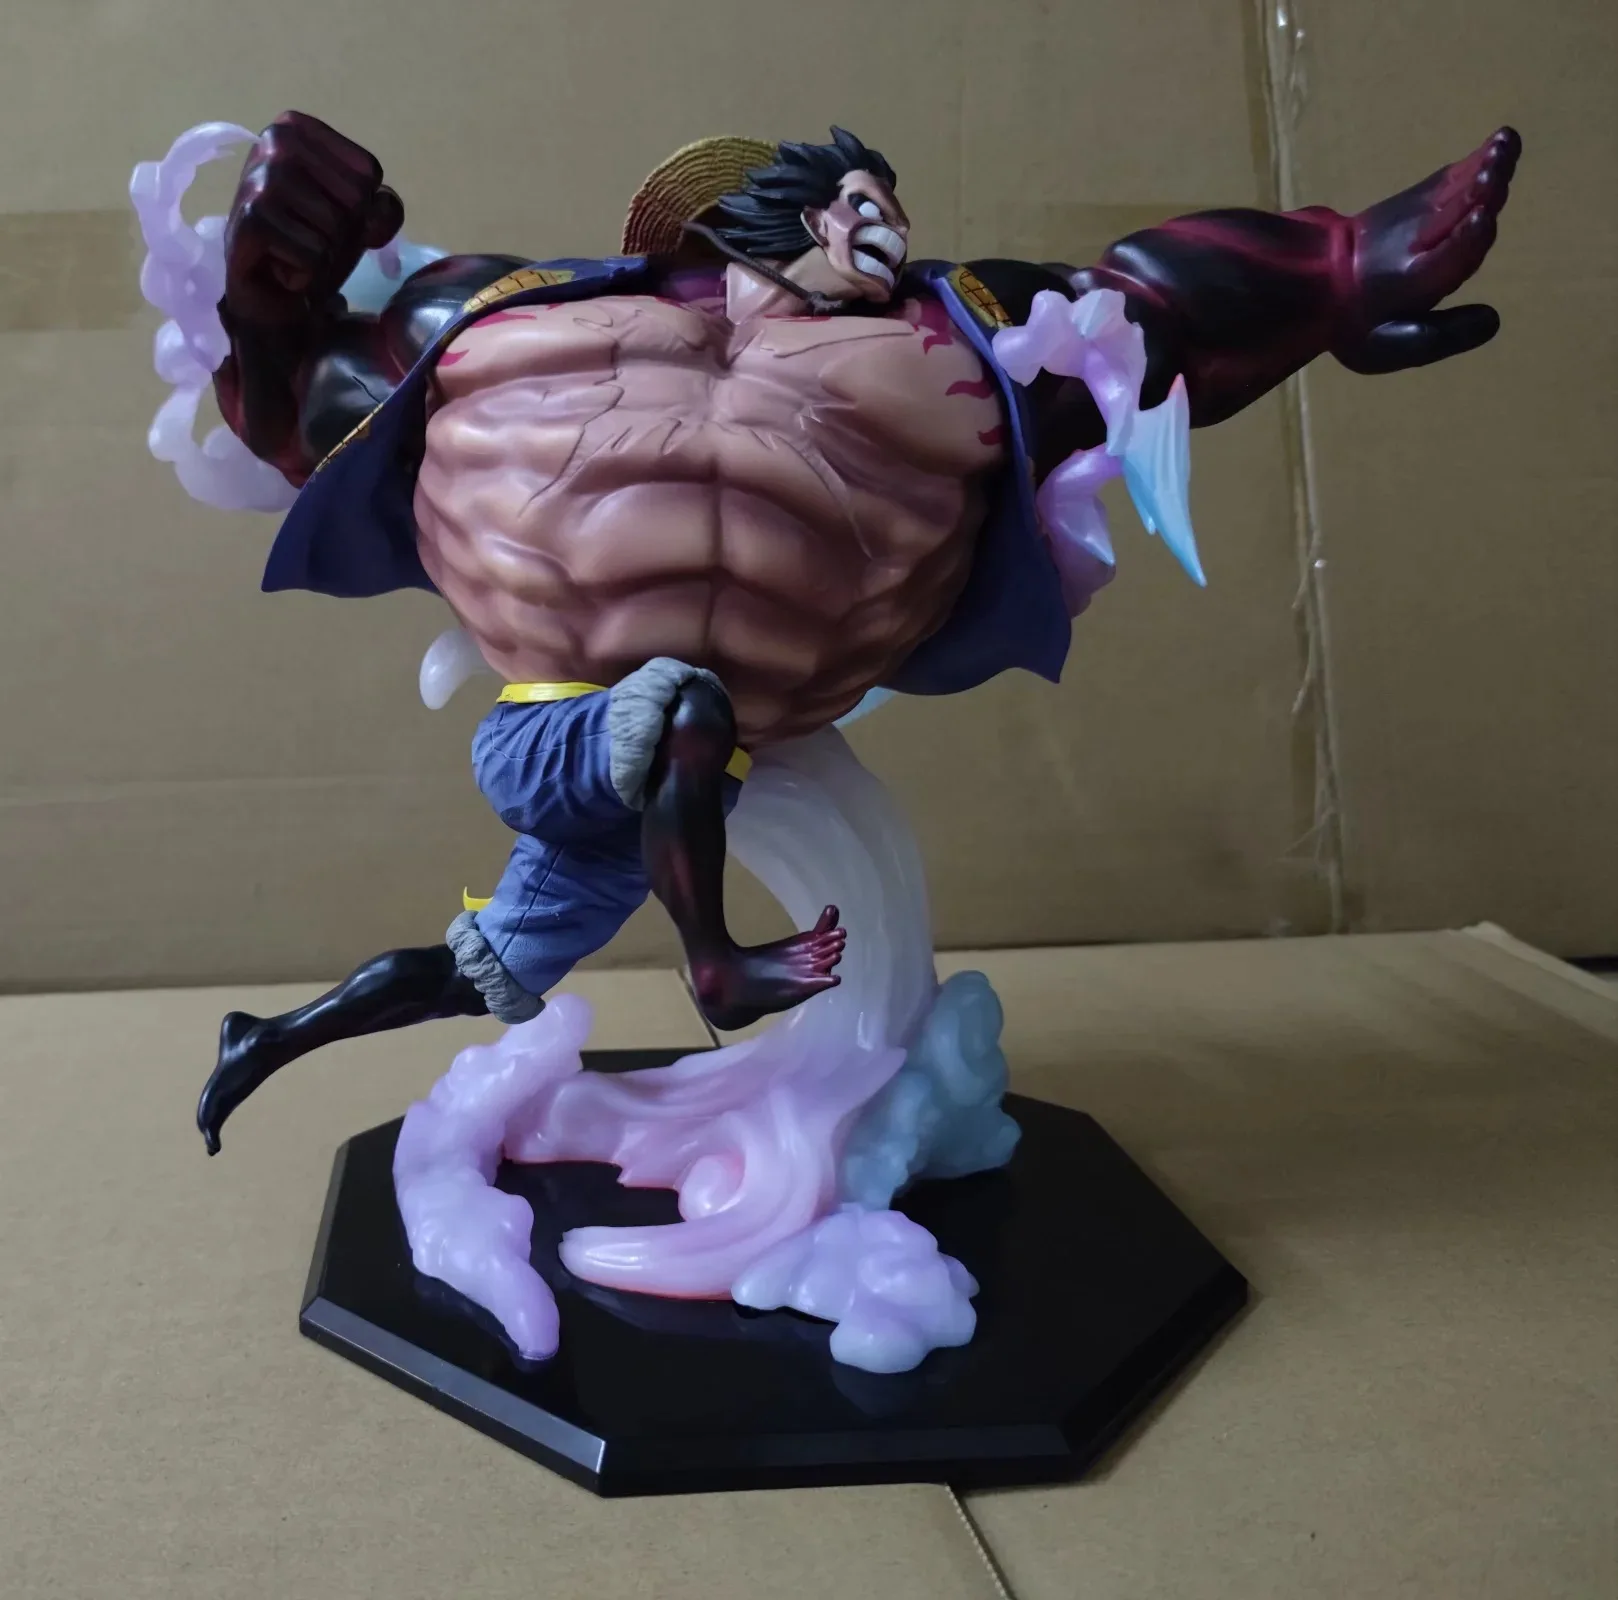 

Anime One Piece The Bound Man Luffy GEAR Fourth Battle Ver. GK PVC Action Figure Statue Collection Model Kids Toys Doll Gifts